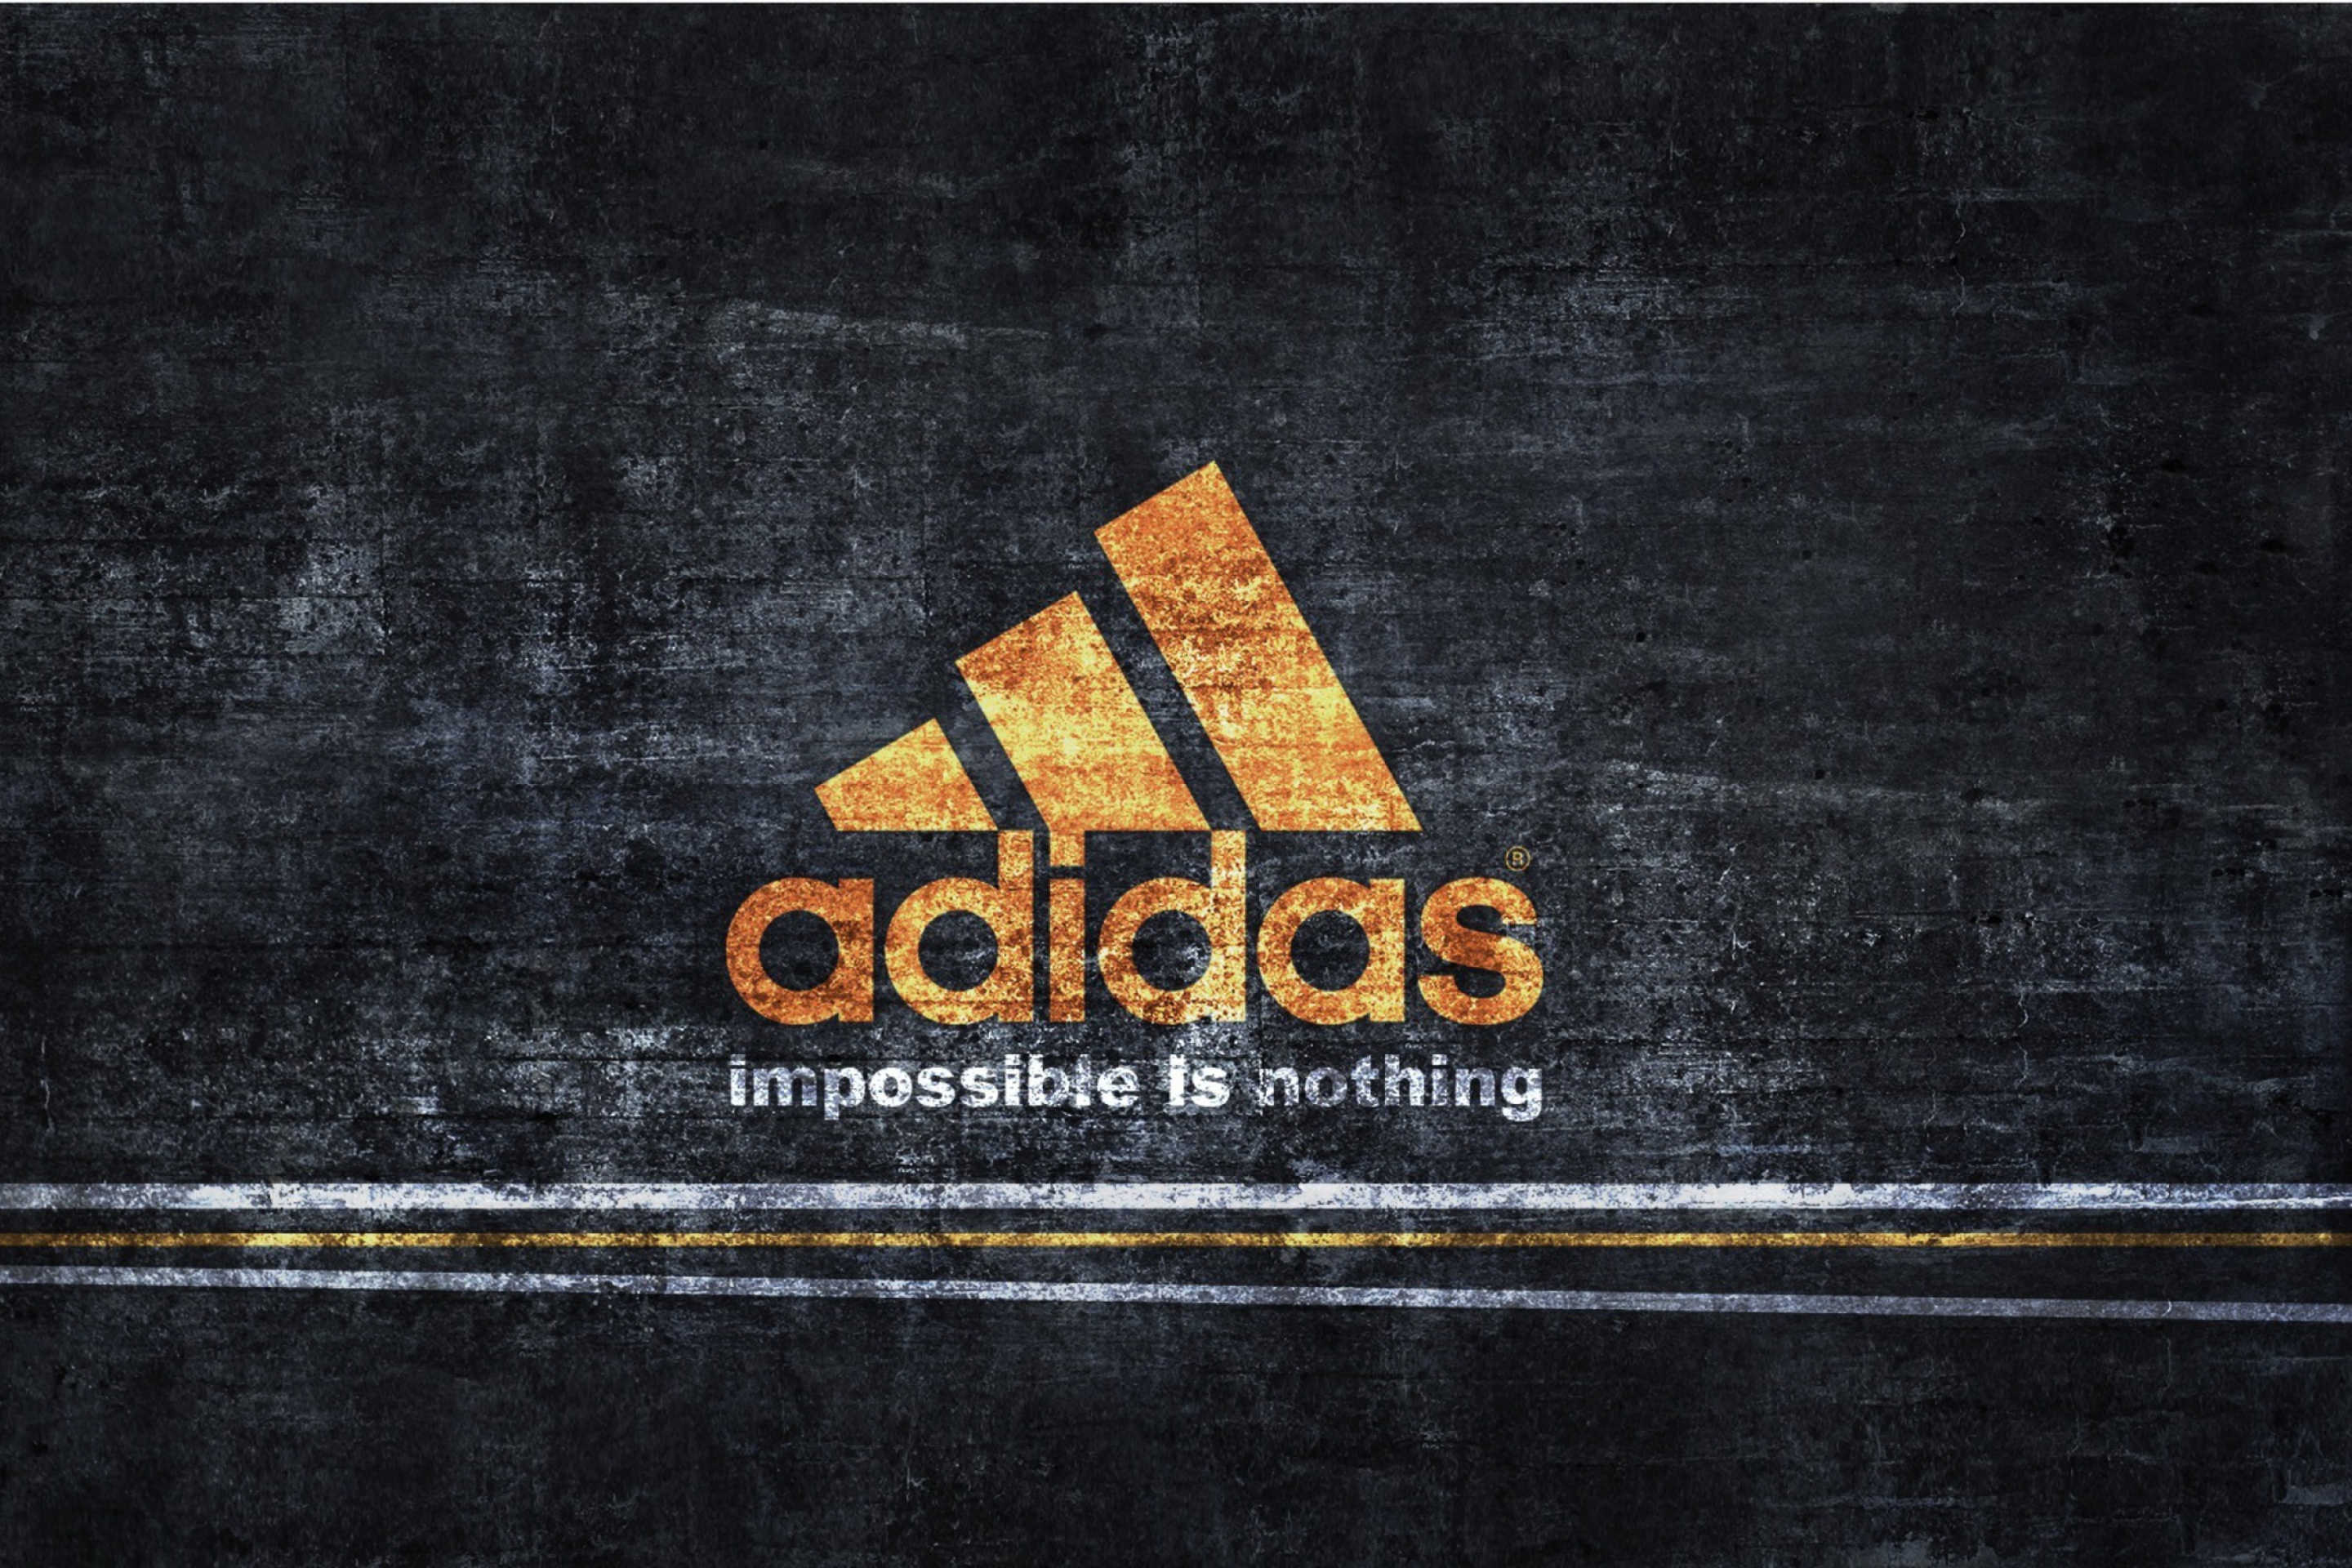 Das Adidas – Impossible is Nothing Wallpaper 2880x1920